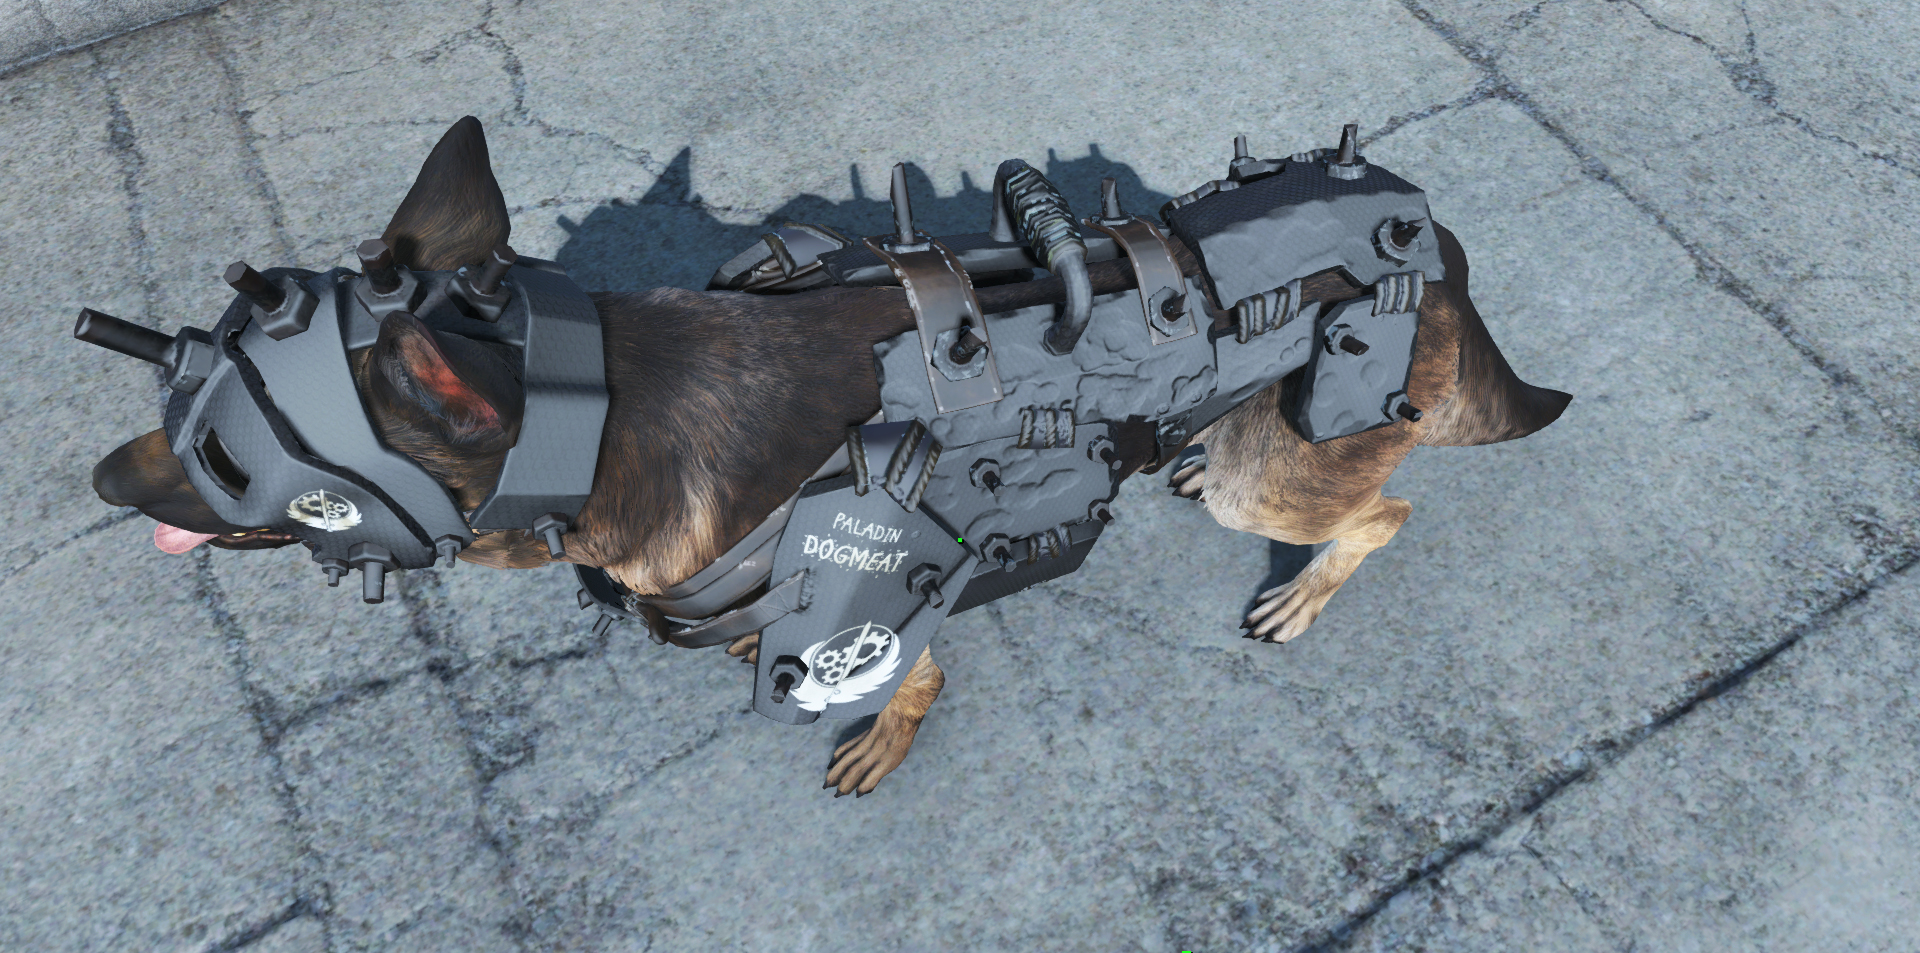 Dogmeat BOS Armor - Fallout 4 / FO4 mods